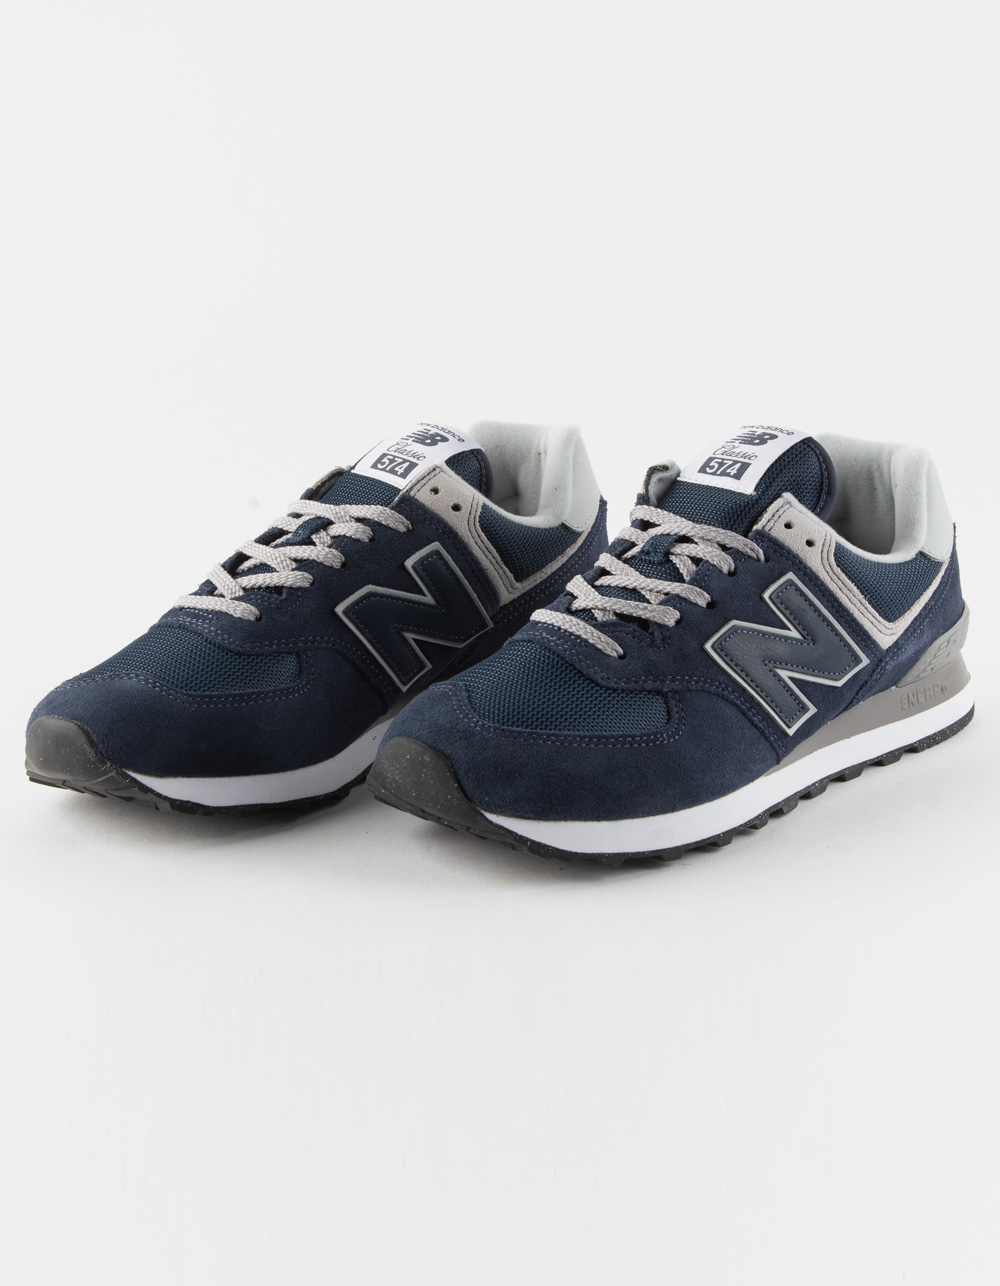 NEW BALANCE 574 Mens Shoes - NAVY/WHITE | Tillys